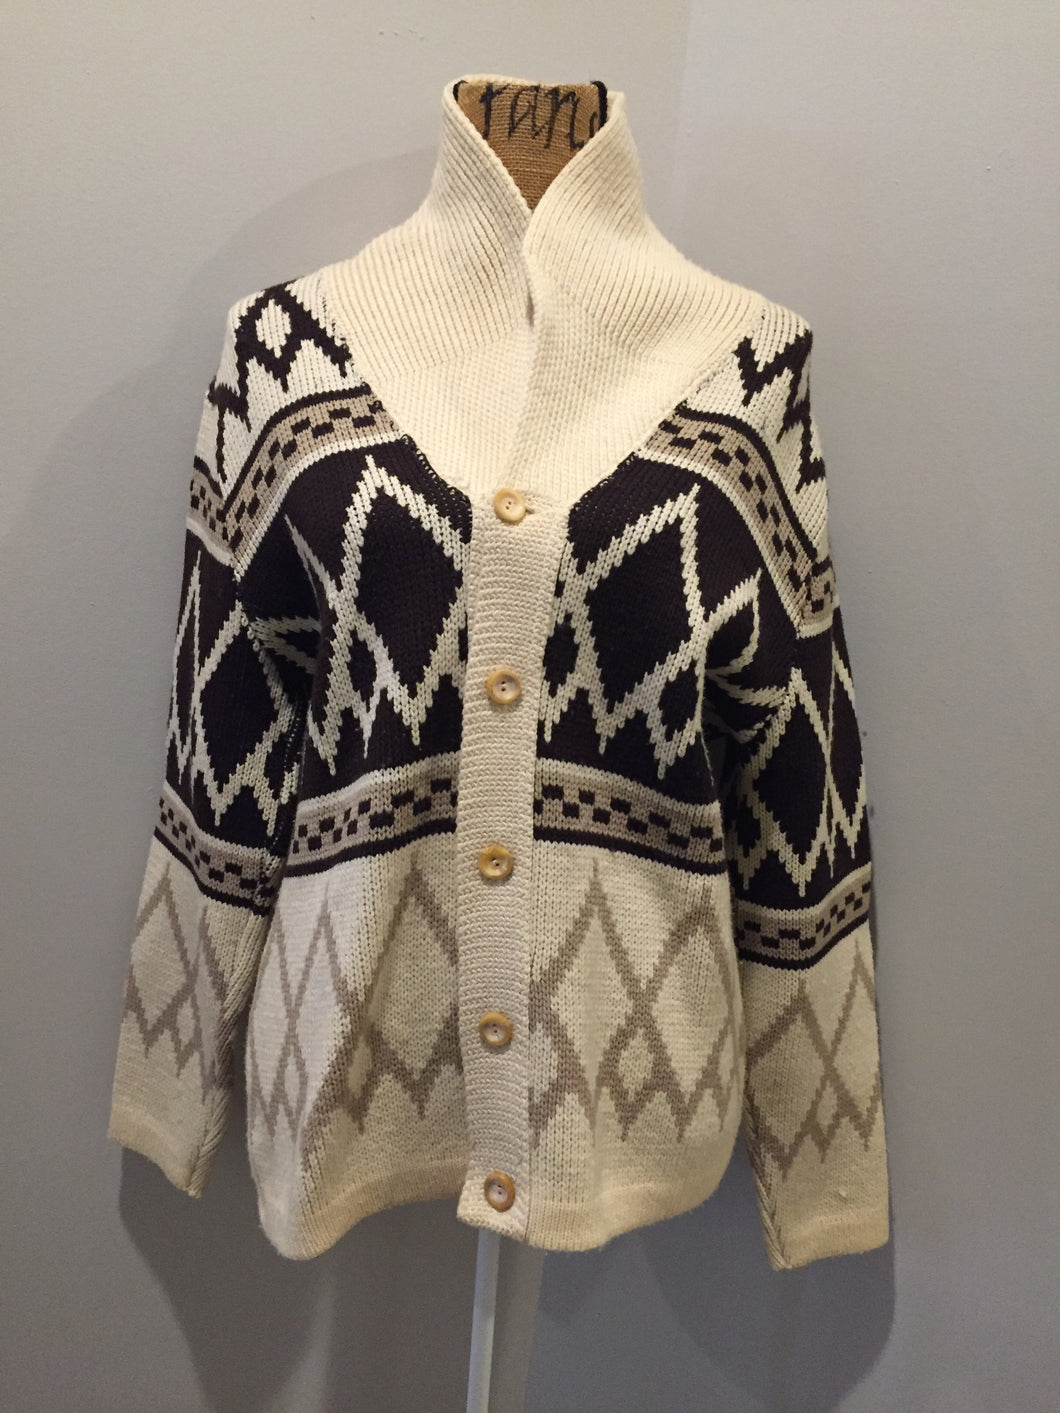 Kingspier Vintage - Tundra pure virgin wool cardigan in cream and brown with shawl collar and button closures. Made in Canada. Size medium